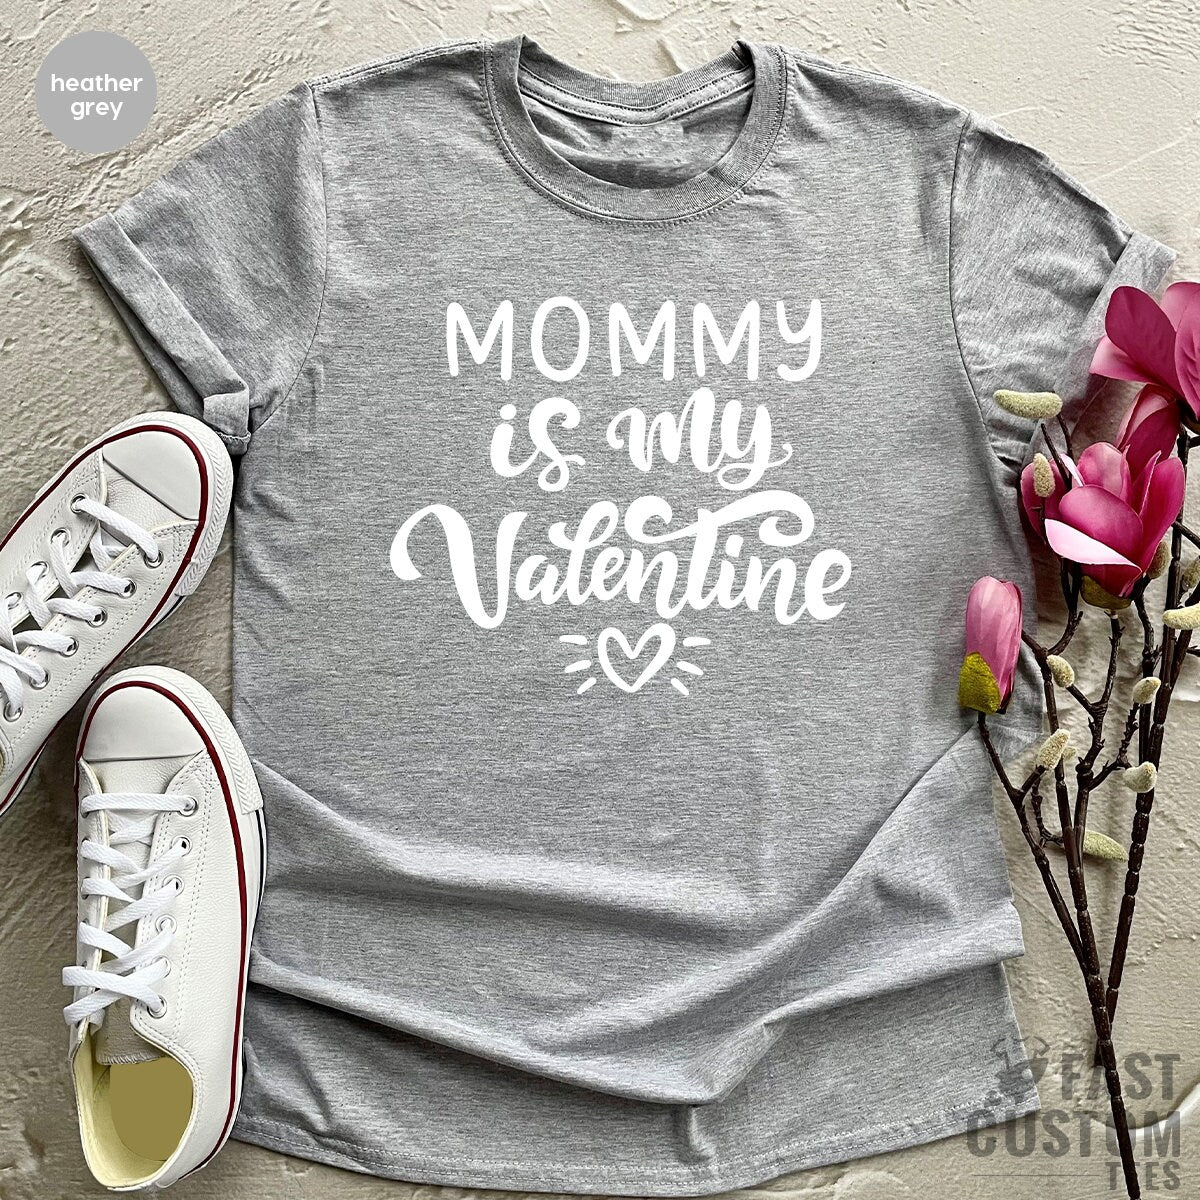 Funny Valentines Day Shirt, Mommy Is My Valentine Shirt, Shirt For Mothers, Boys Valentine Shirt, Mamas Shirt, Mommy Shirt, Boy Mommy Shirt - Fastdeliverytees.com